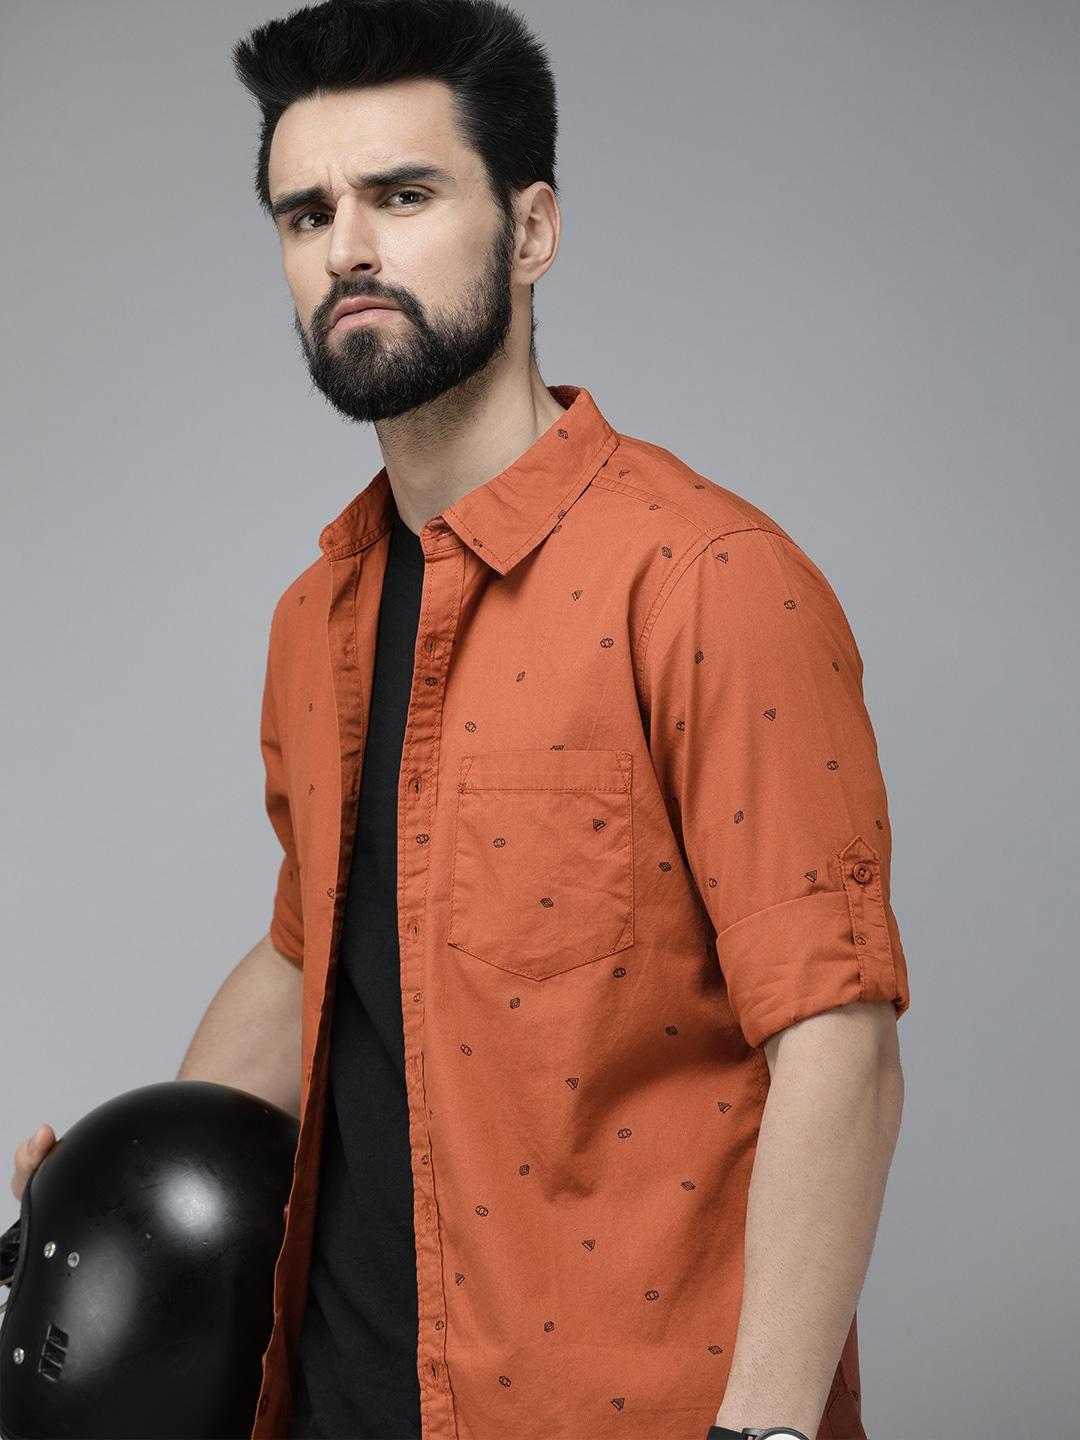 the-roadster-lifestyle-co-men-rust-red-geometric-printed-pure-cotton-casual-shirt